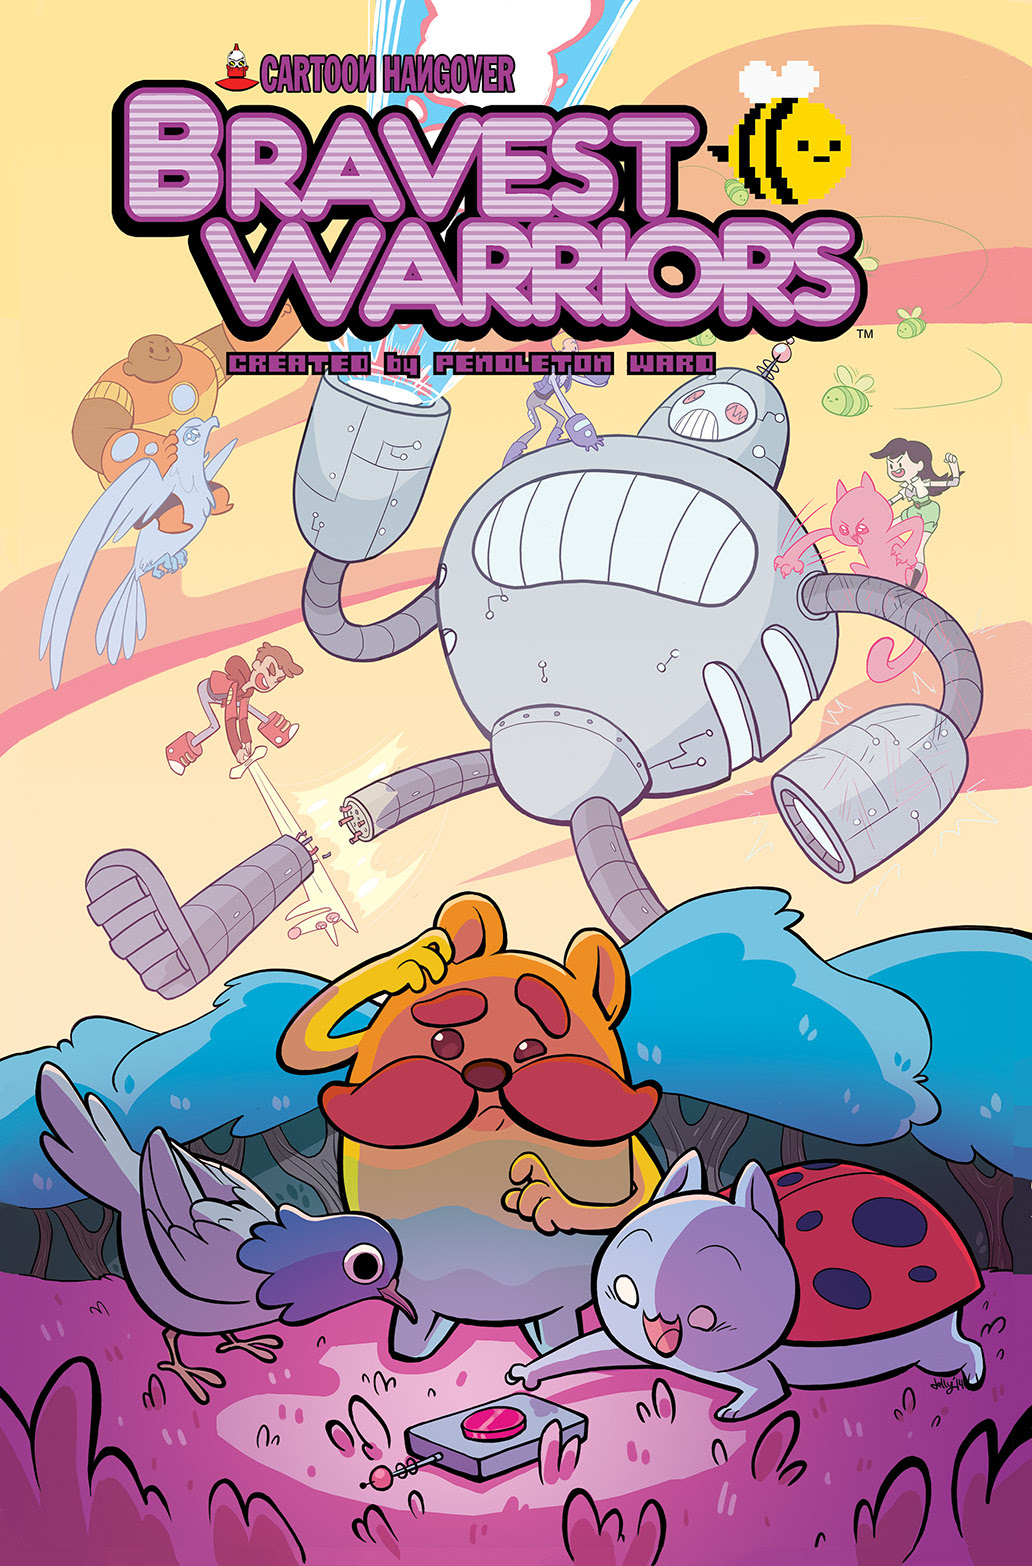 BRAVEST WARRIORS #24 Cover A by Angelica Russell